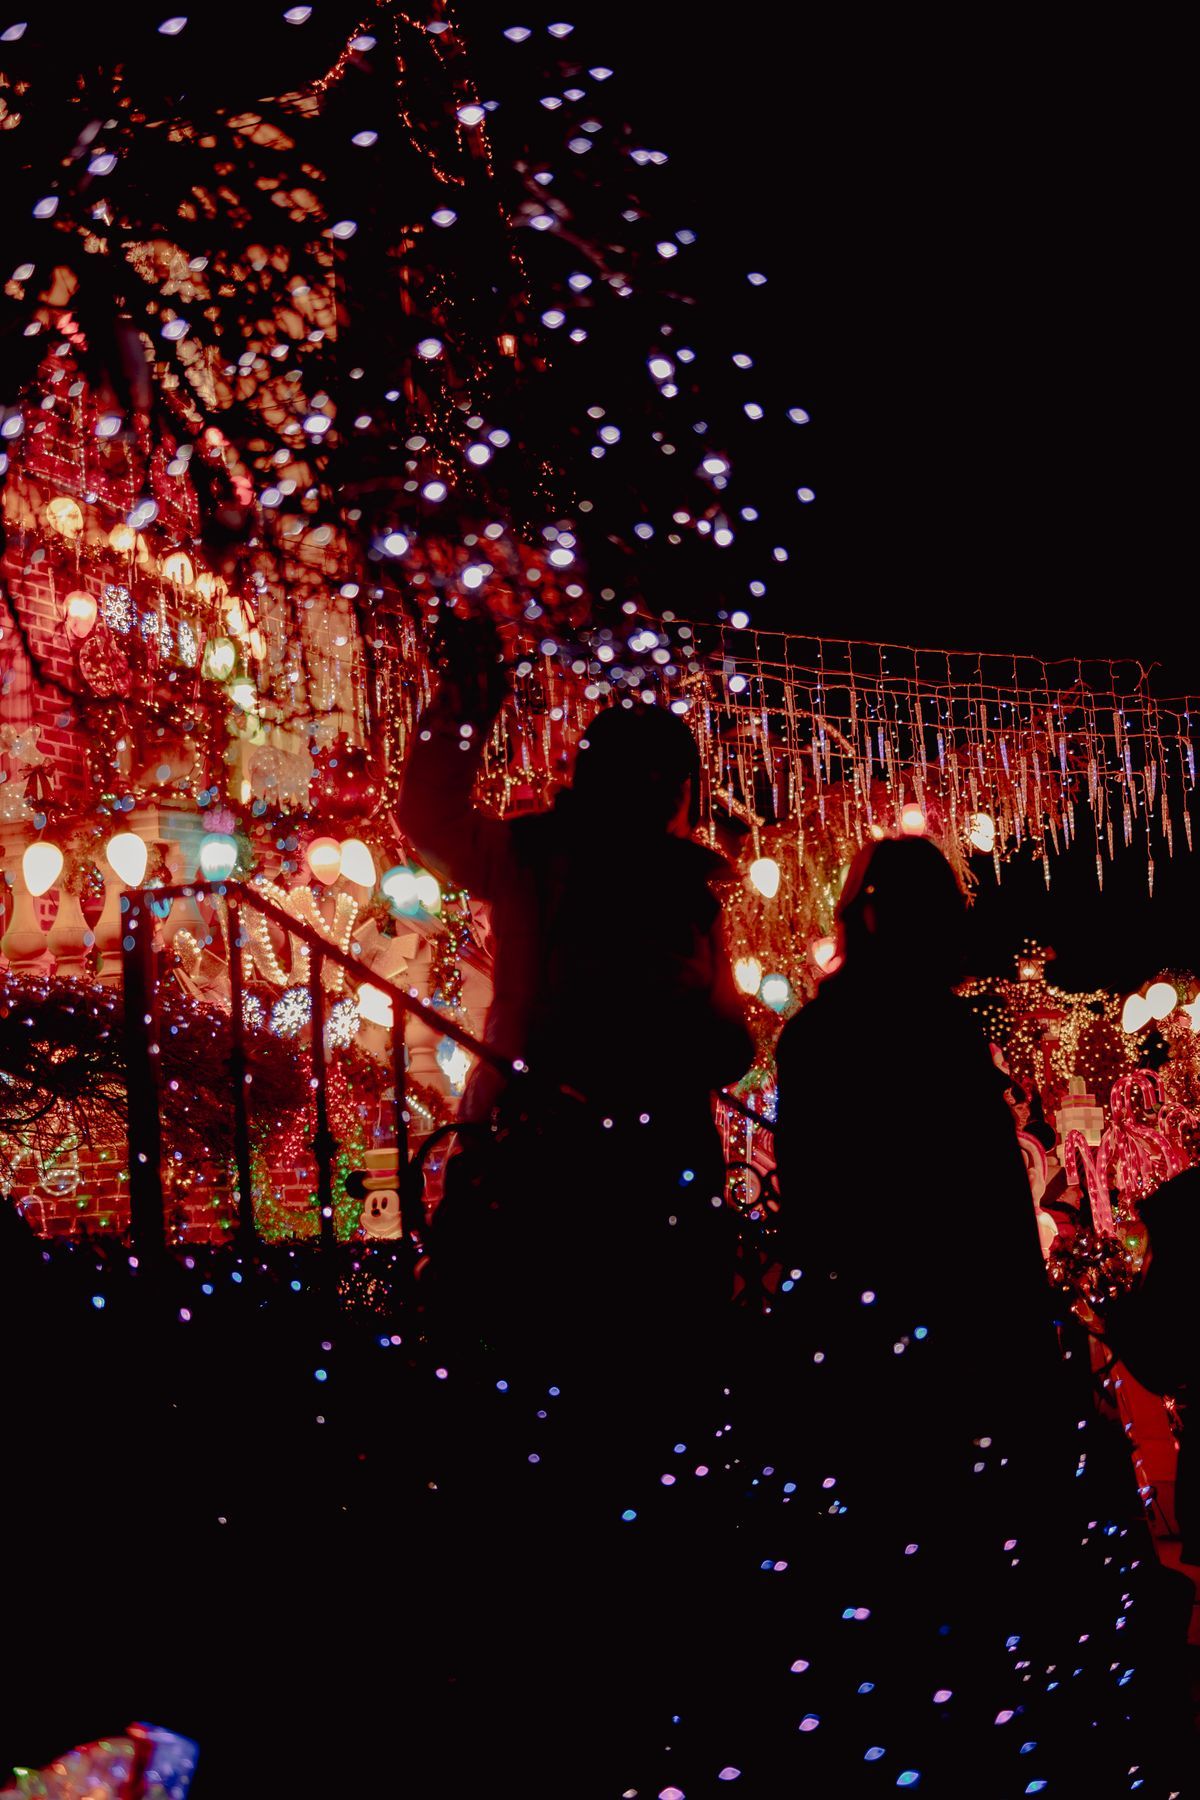 The Christmas Light Displays That Draw Thousands of Holiday Faithful